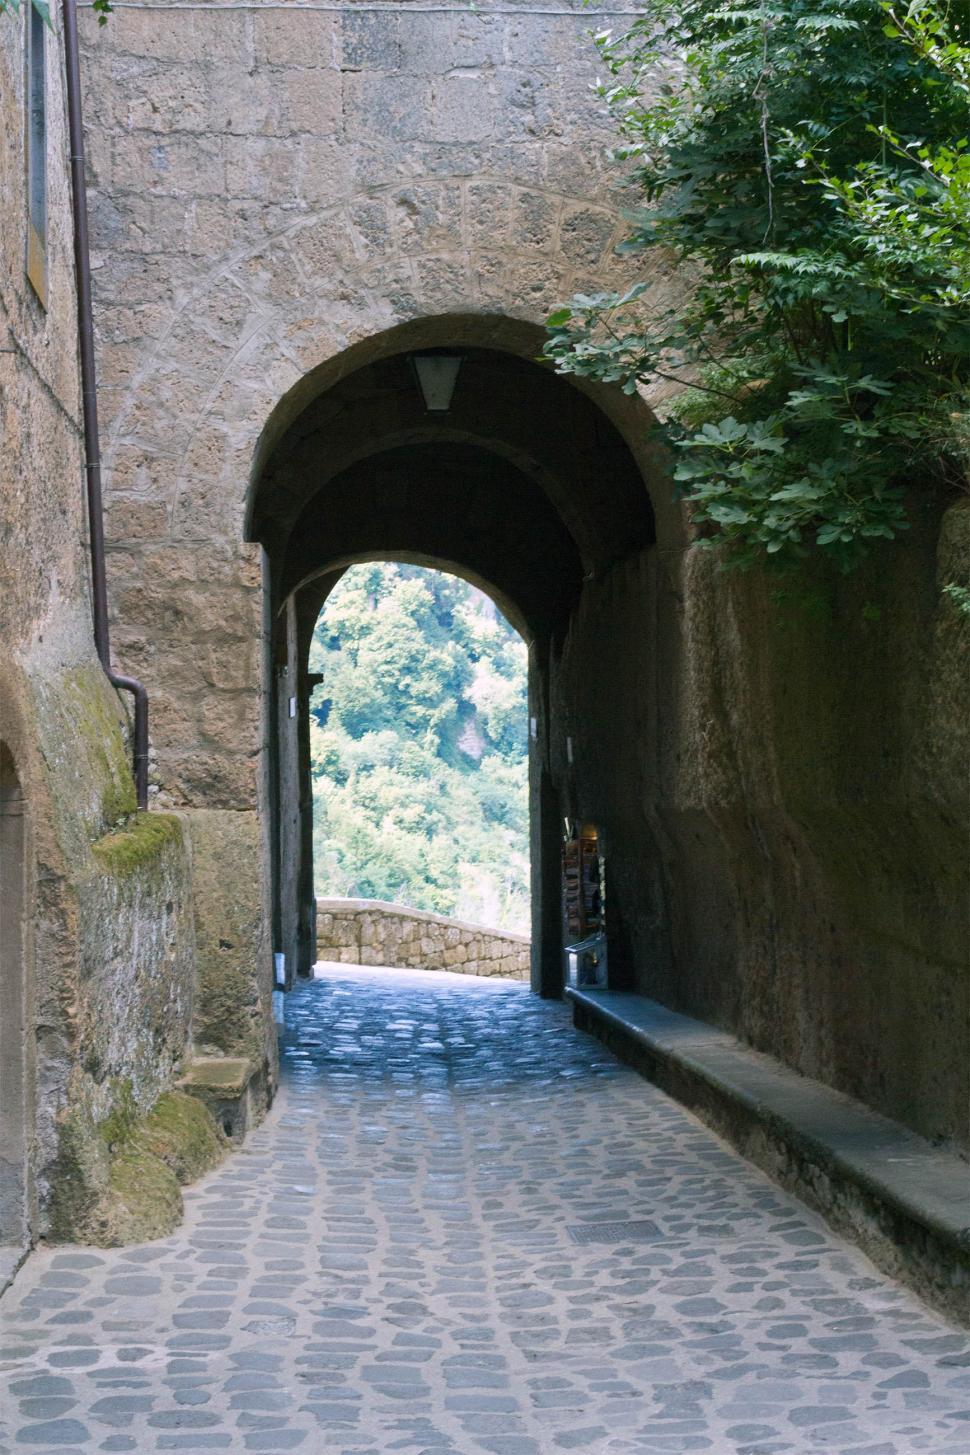 Free Image of City Arches 